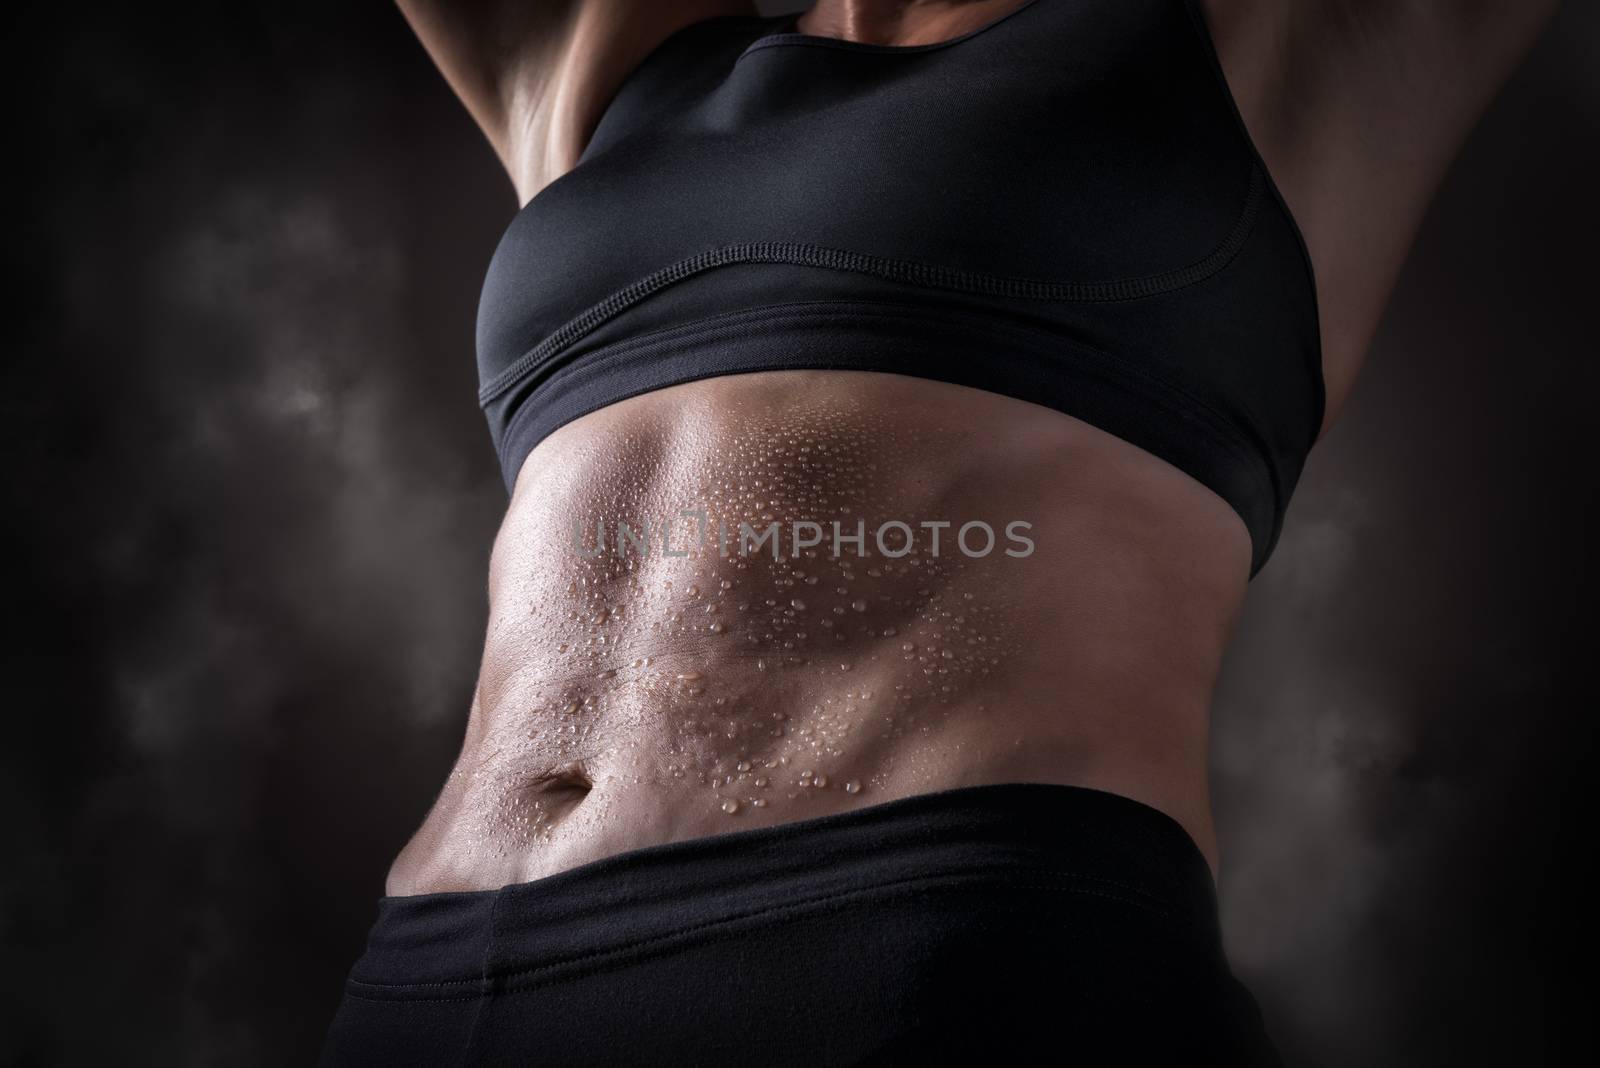 Picture of a trained belly of a middle aged woman over 45 years